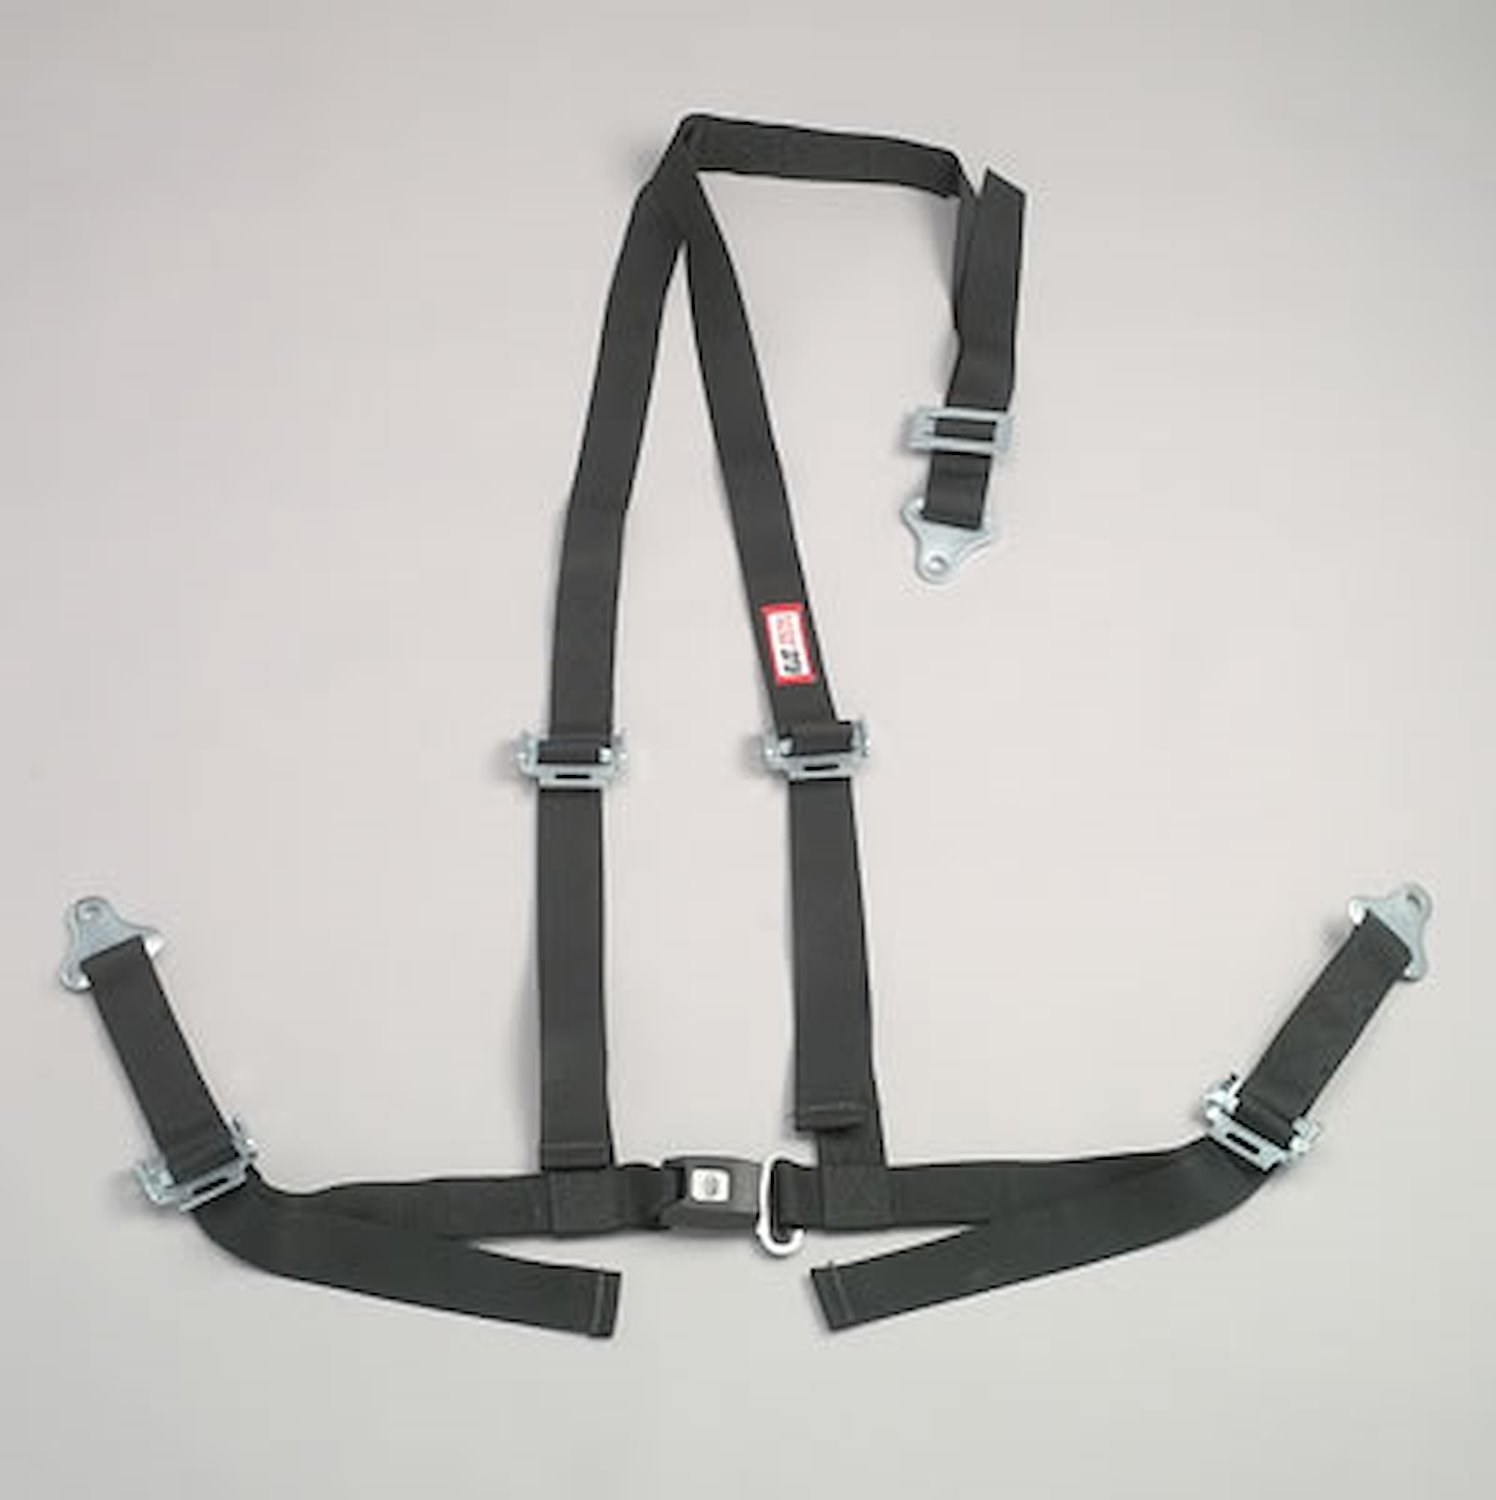 NON-SFI B&T HARNESS 2 PULL UP Lap Belt BOLT 2 S. H. Individual FLOOR Mount WRAP/BOLT w/STERNUM STRAP RED